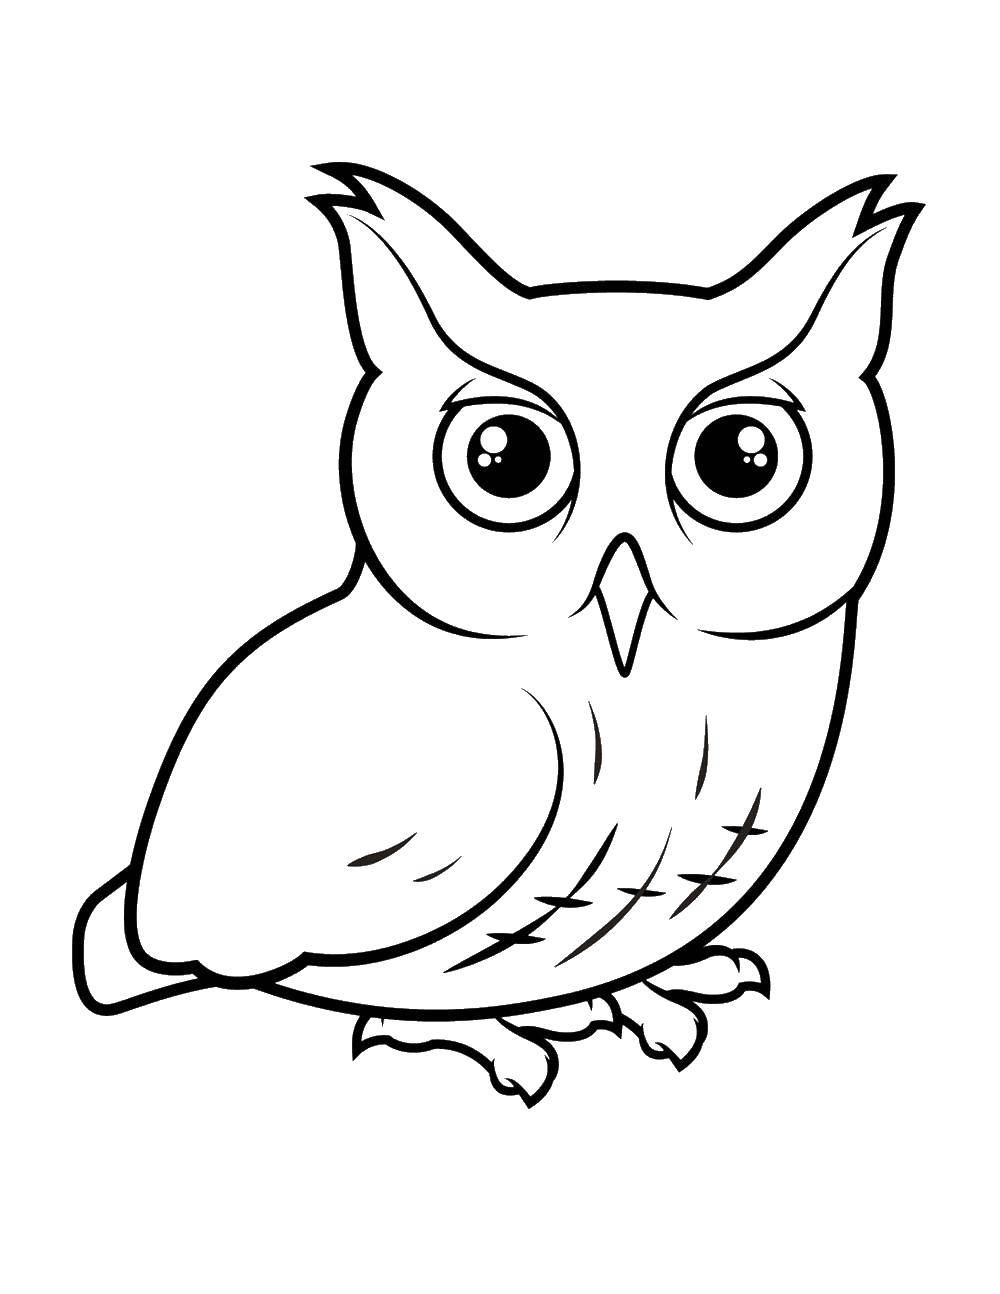 Coloring Owl. Category Animals. Tags:  animals, birds, owl.